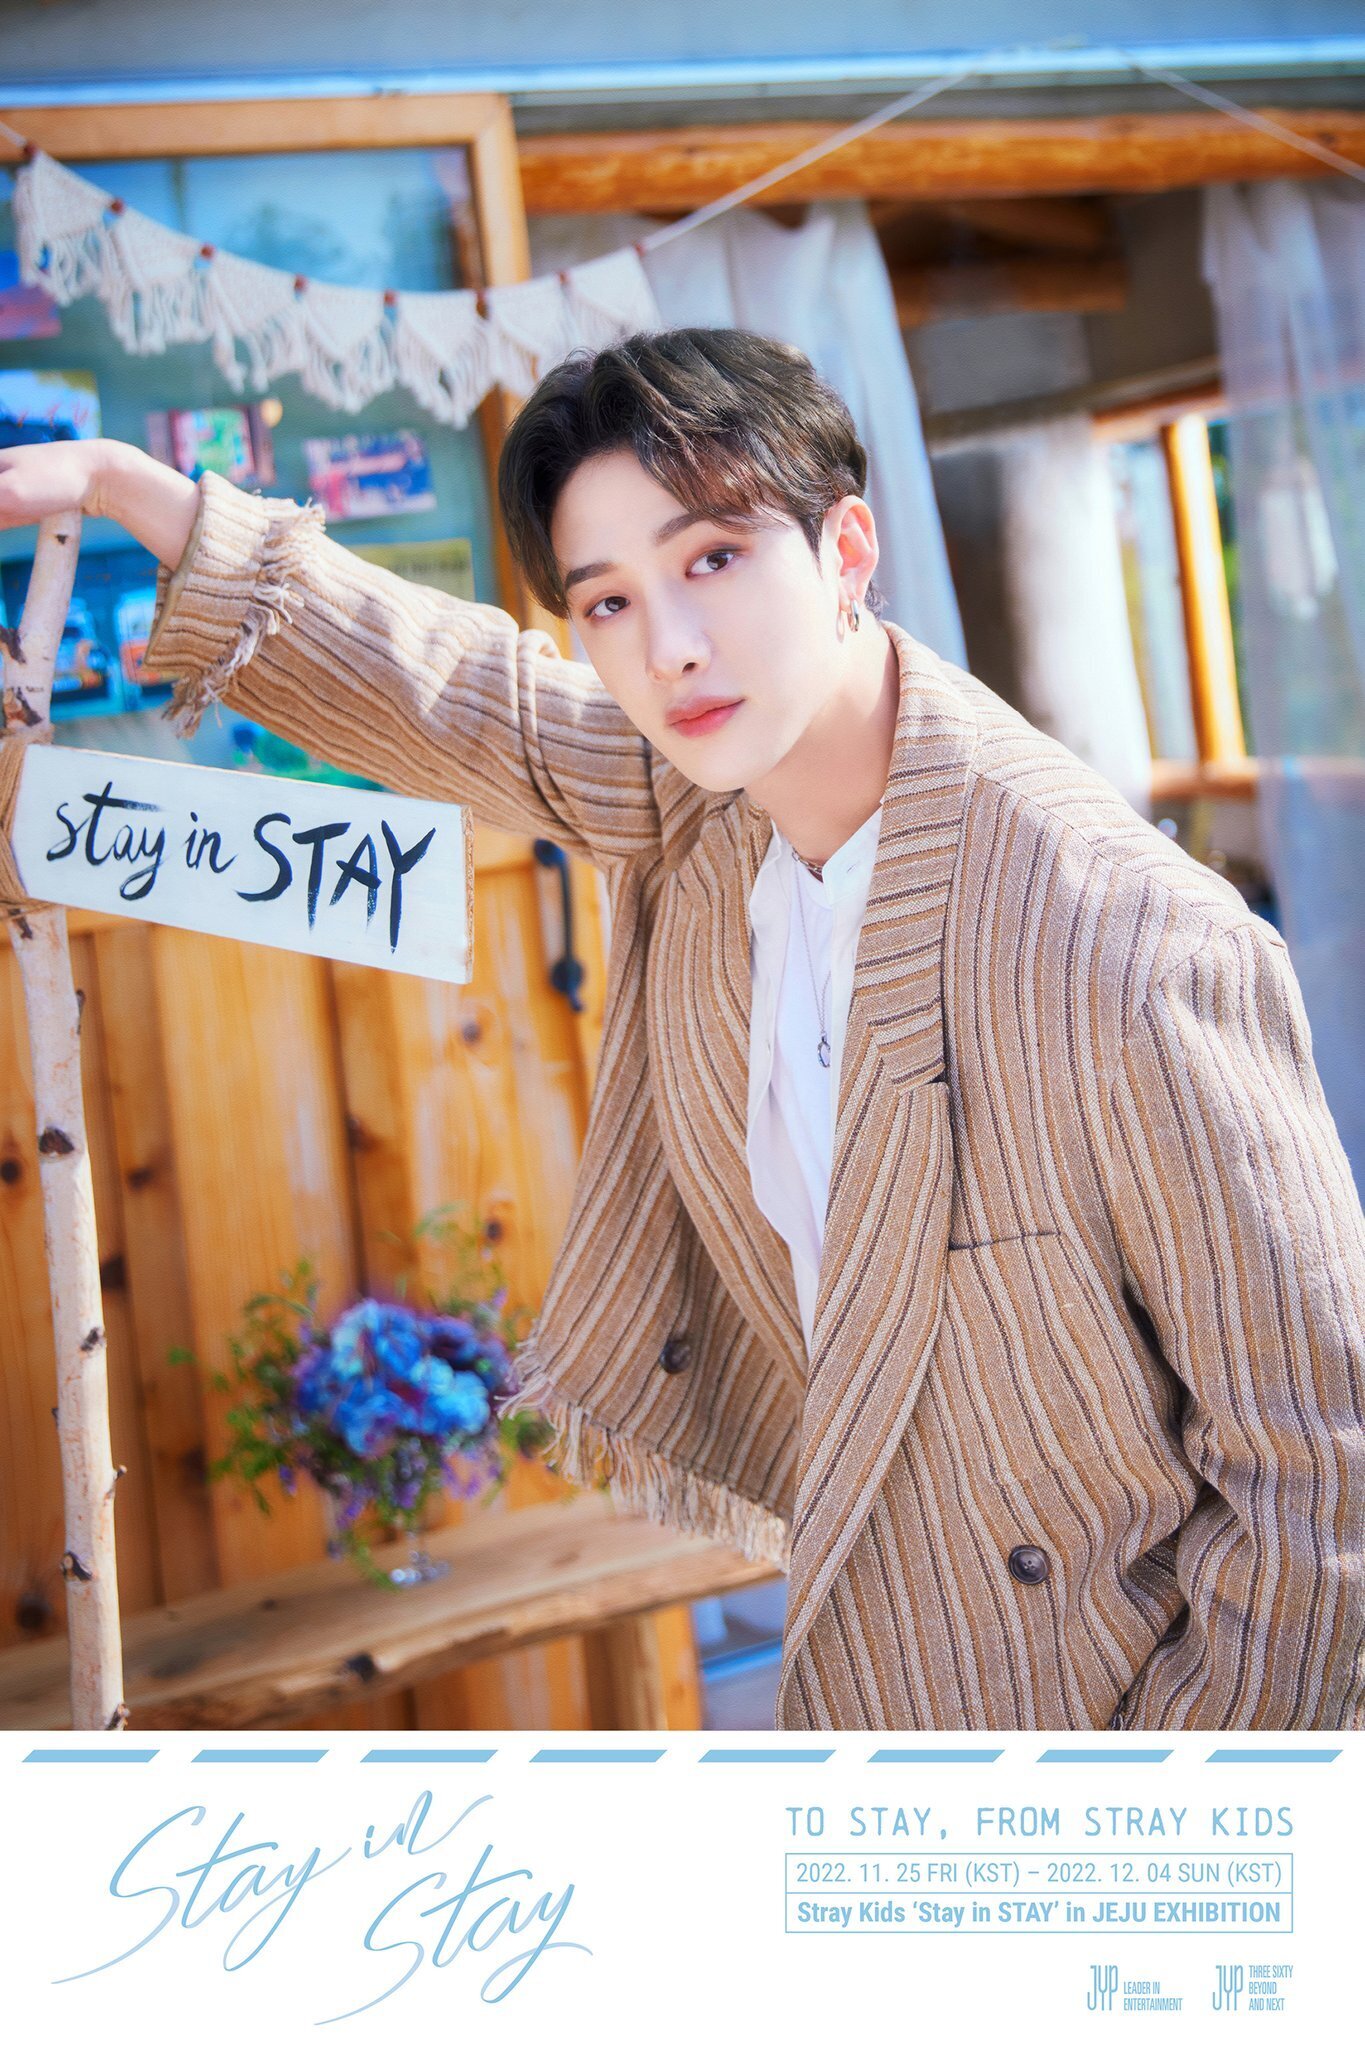 Stray Kids 'Stay in STAY' in JEJU EXHIBITION Photos | kpopping